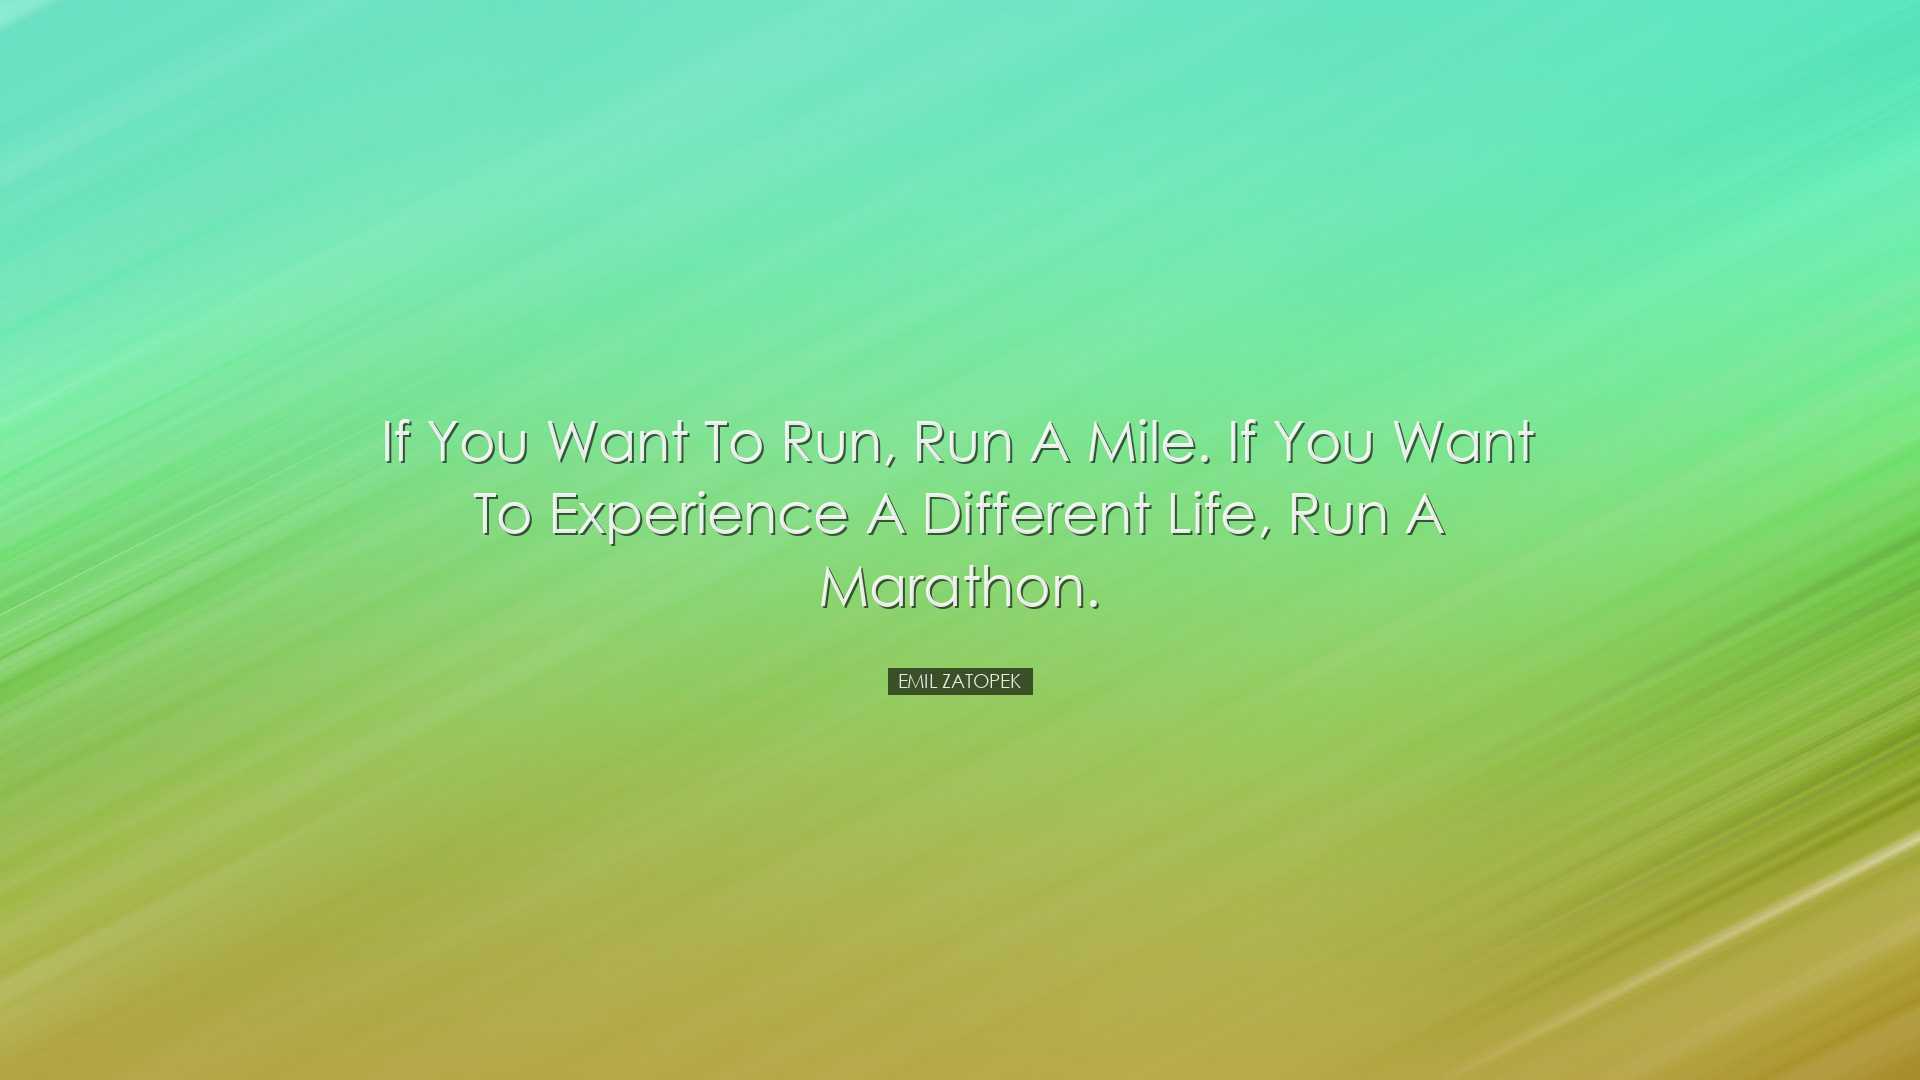 If you want to run, run a mile. If you want to experience a differ